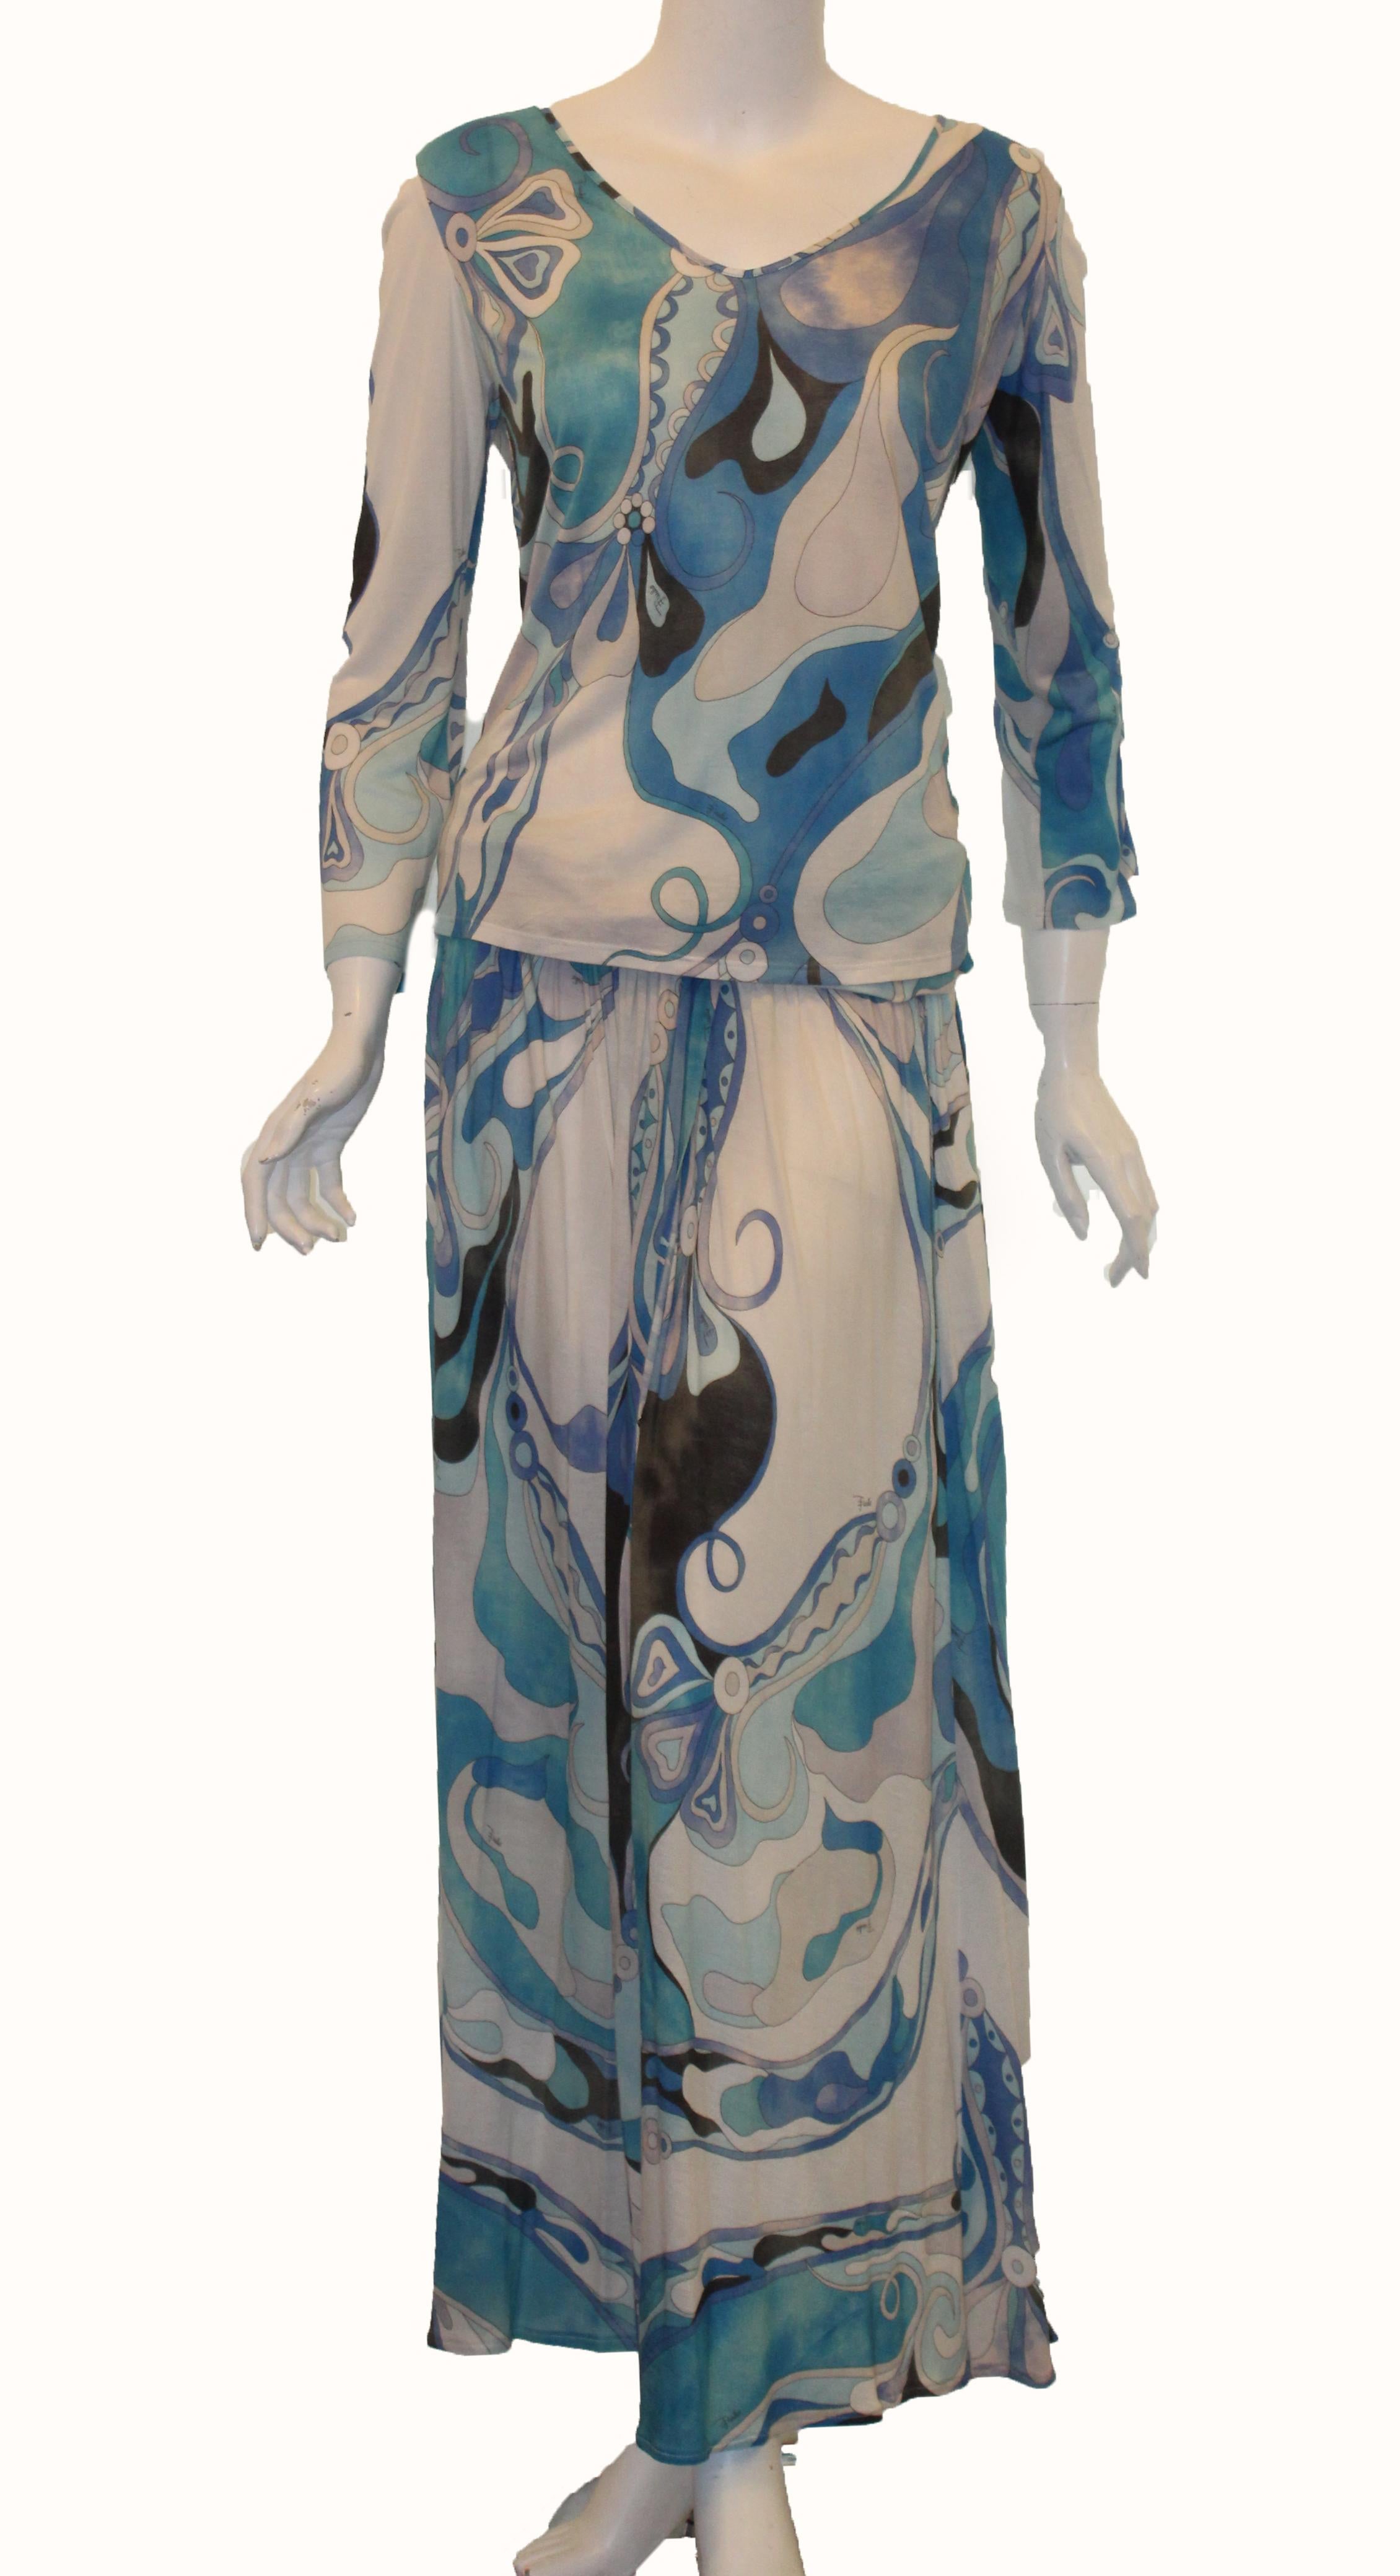 Emilio Pucci blue tones abstract iconic design in this top and long skirt set can be worn together or individually.  This vintage 2 piece ensemble incorporates a long sleeve boat neck collar top and a long skirt with drape accent at waist and slit